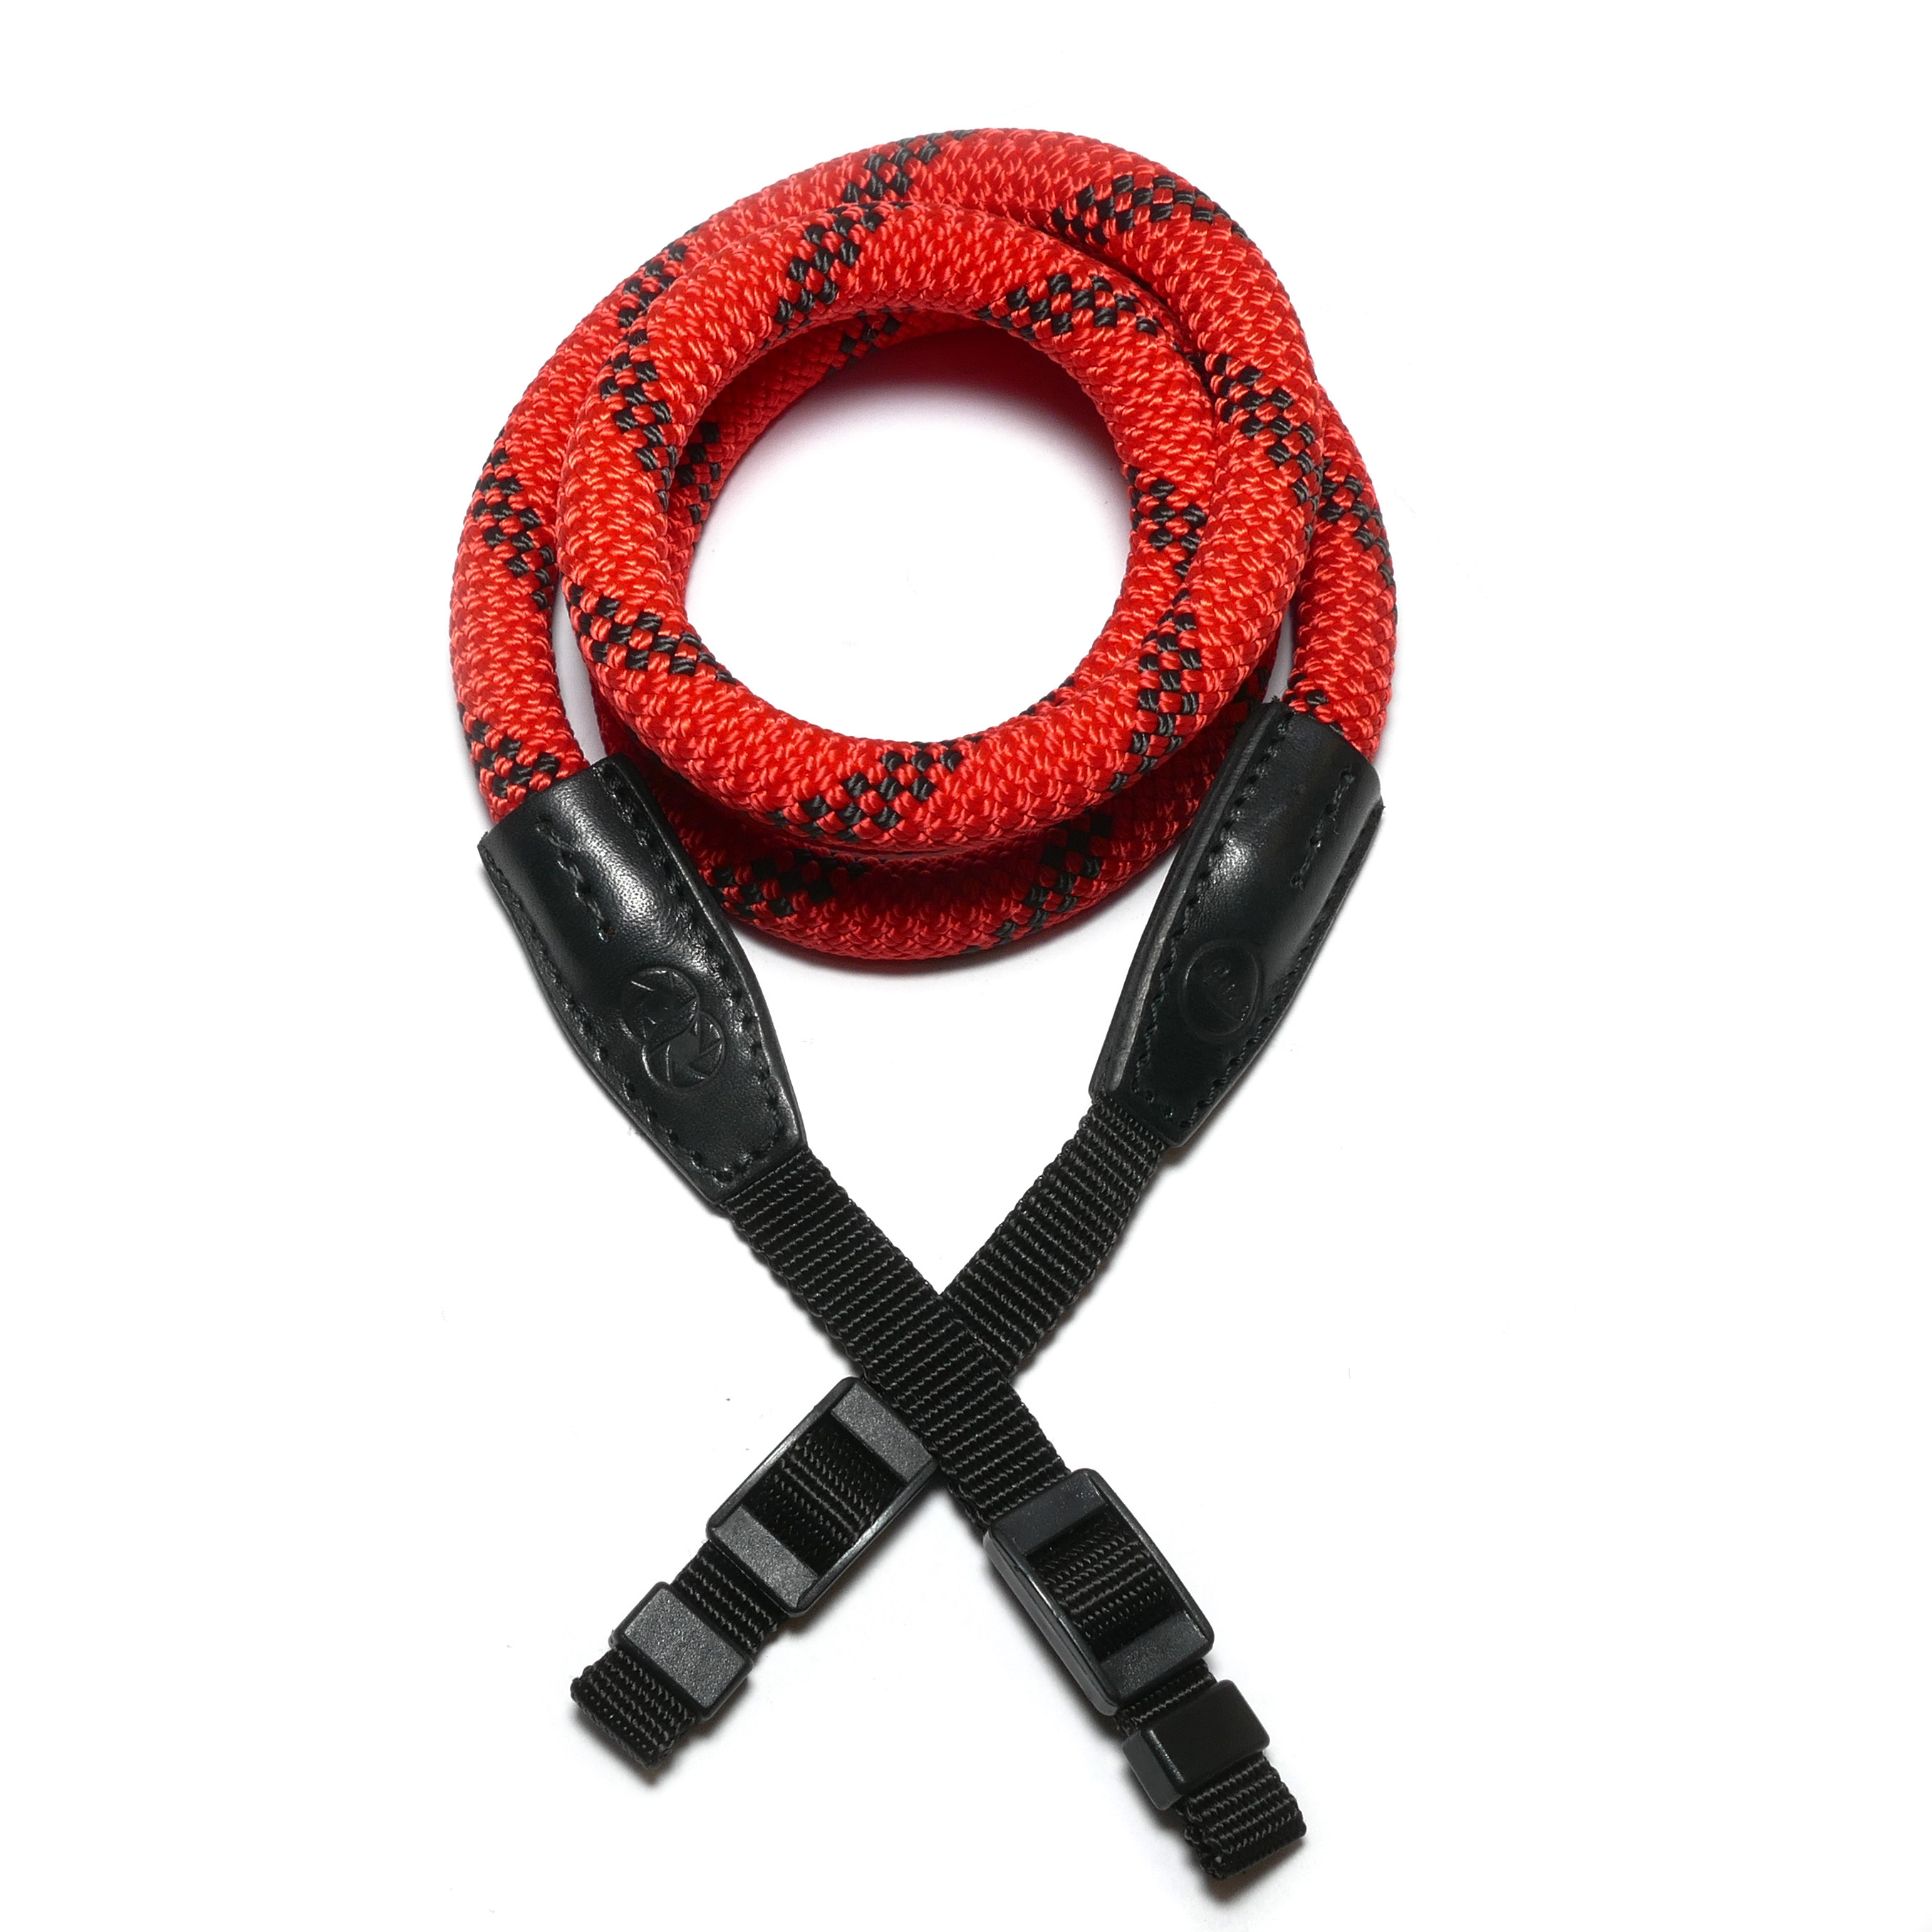 Leica Paracord Straps created by cooph – COOPH